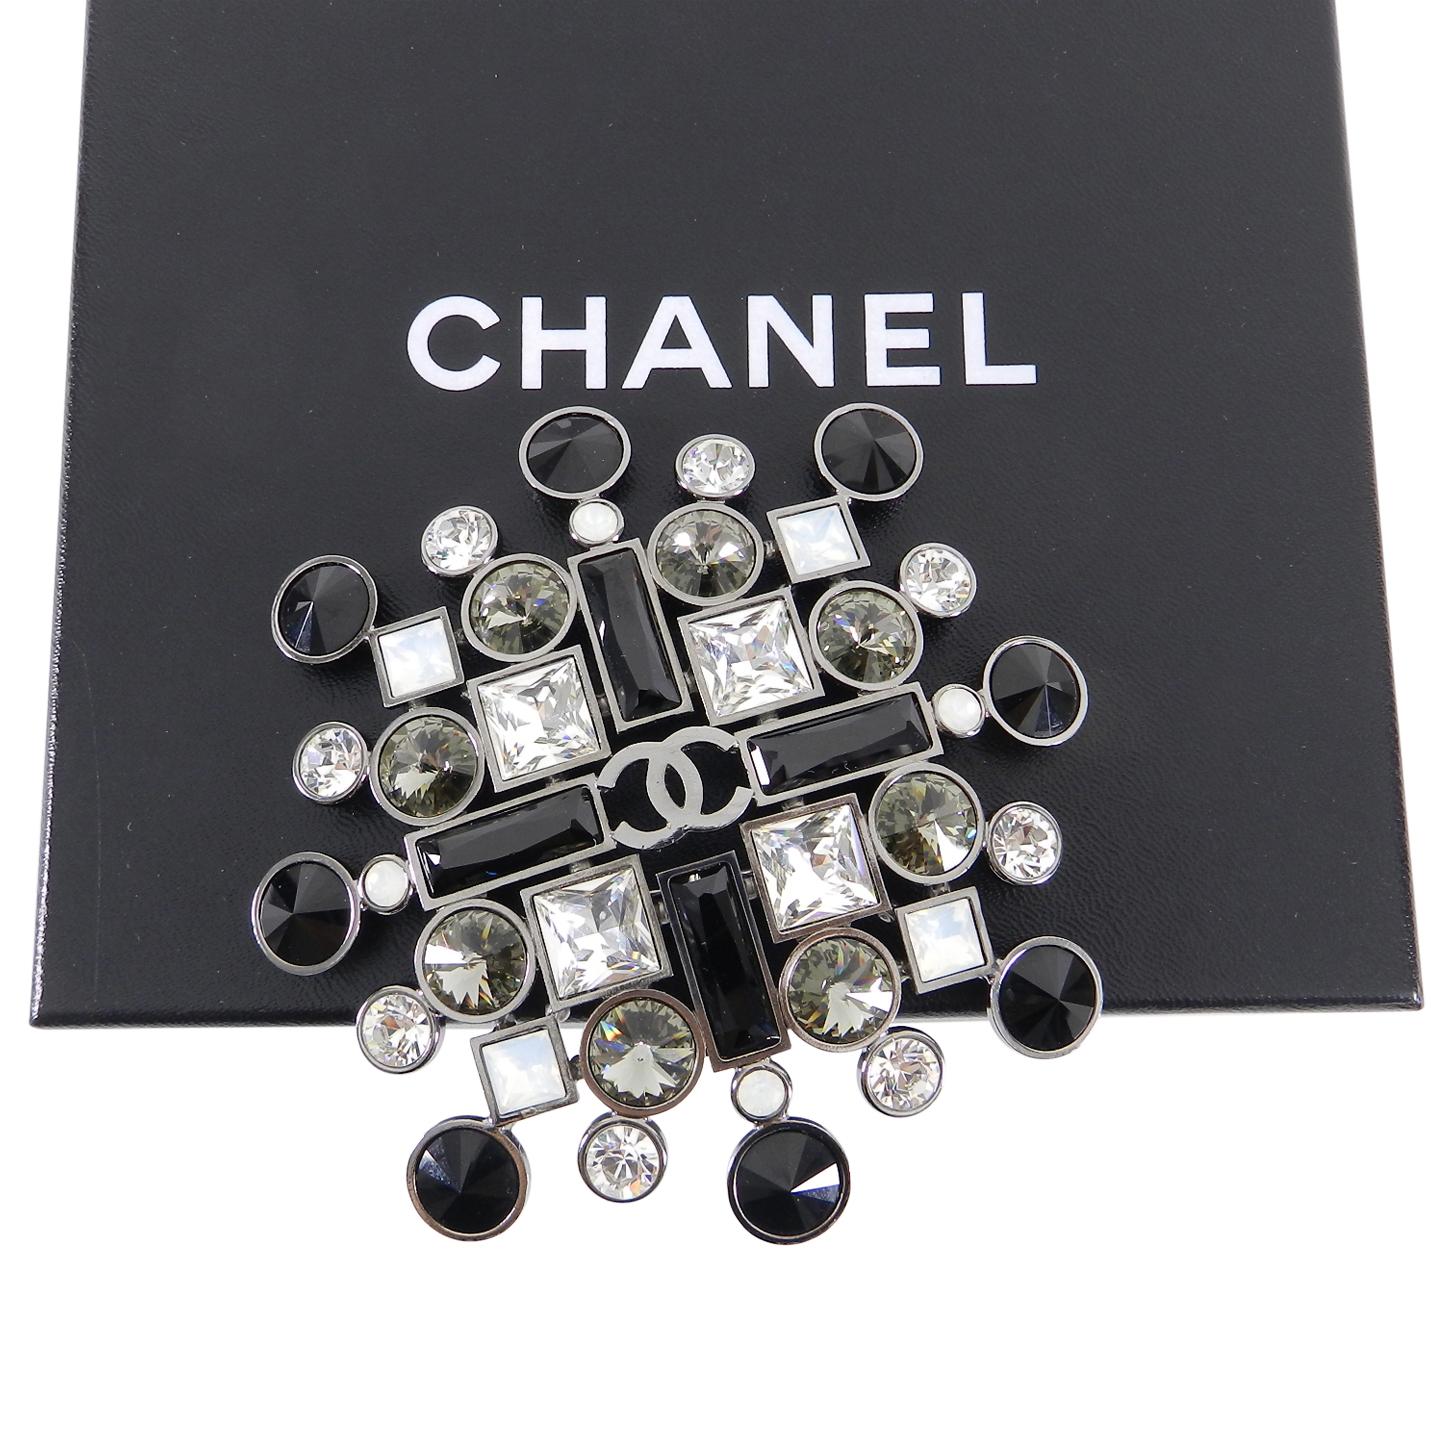 Chanel 06A Large Black, Clear, Grey, Crystal Statement Brooch Pin.  Dark gunmetal base with faceted crystal jewels and CC logo at centre.  Extra large statement size measuring 4-⅛” x 4-⅛”. Has a bale at back above pin-back to be worn as a pendant.